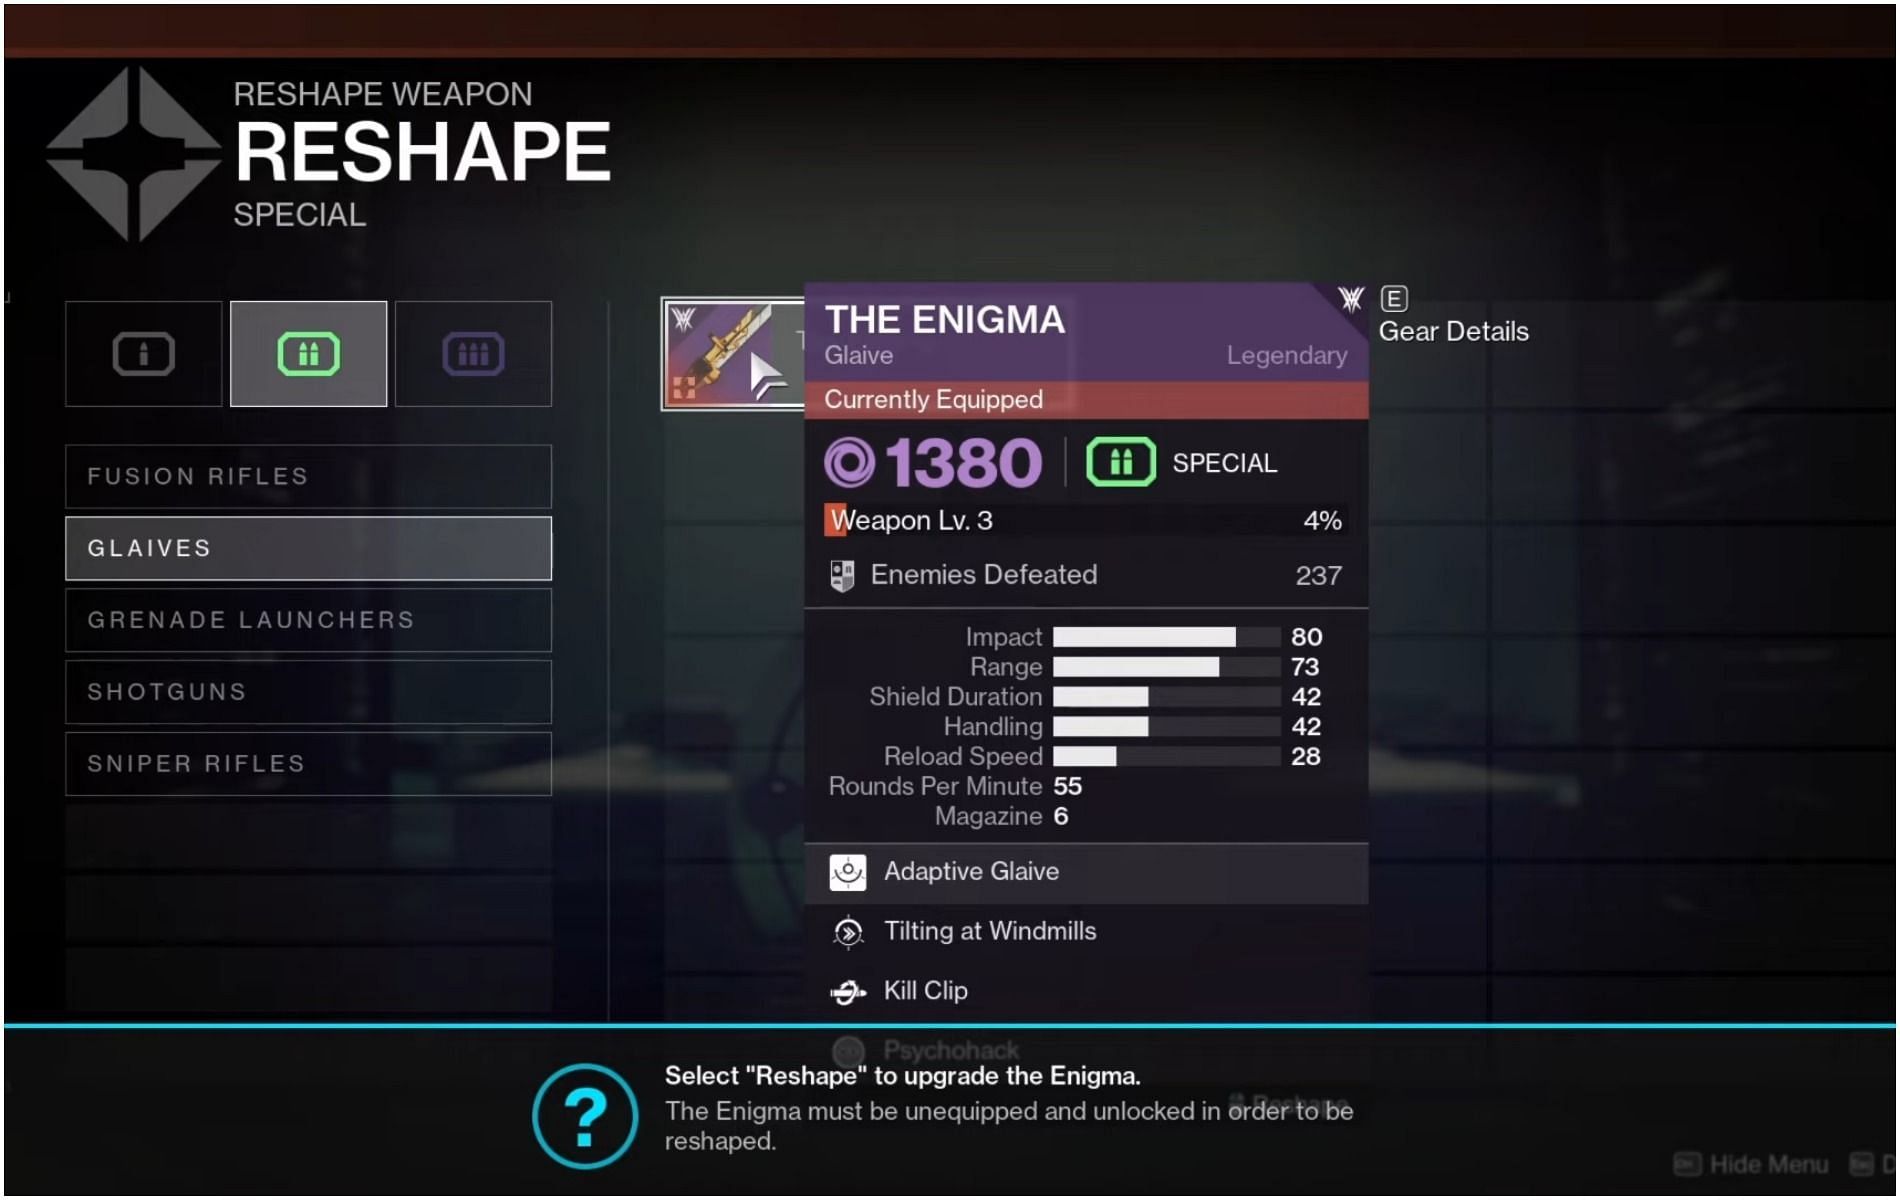 Completing Reshaping the Enigma in Destiny 2 The Witch Queen (Image via Destiny 2)